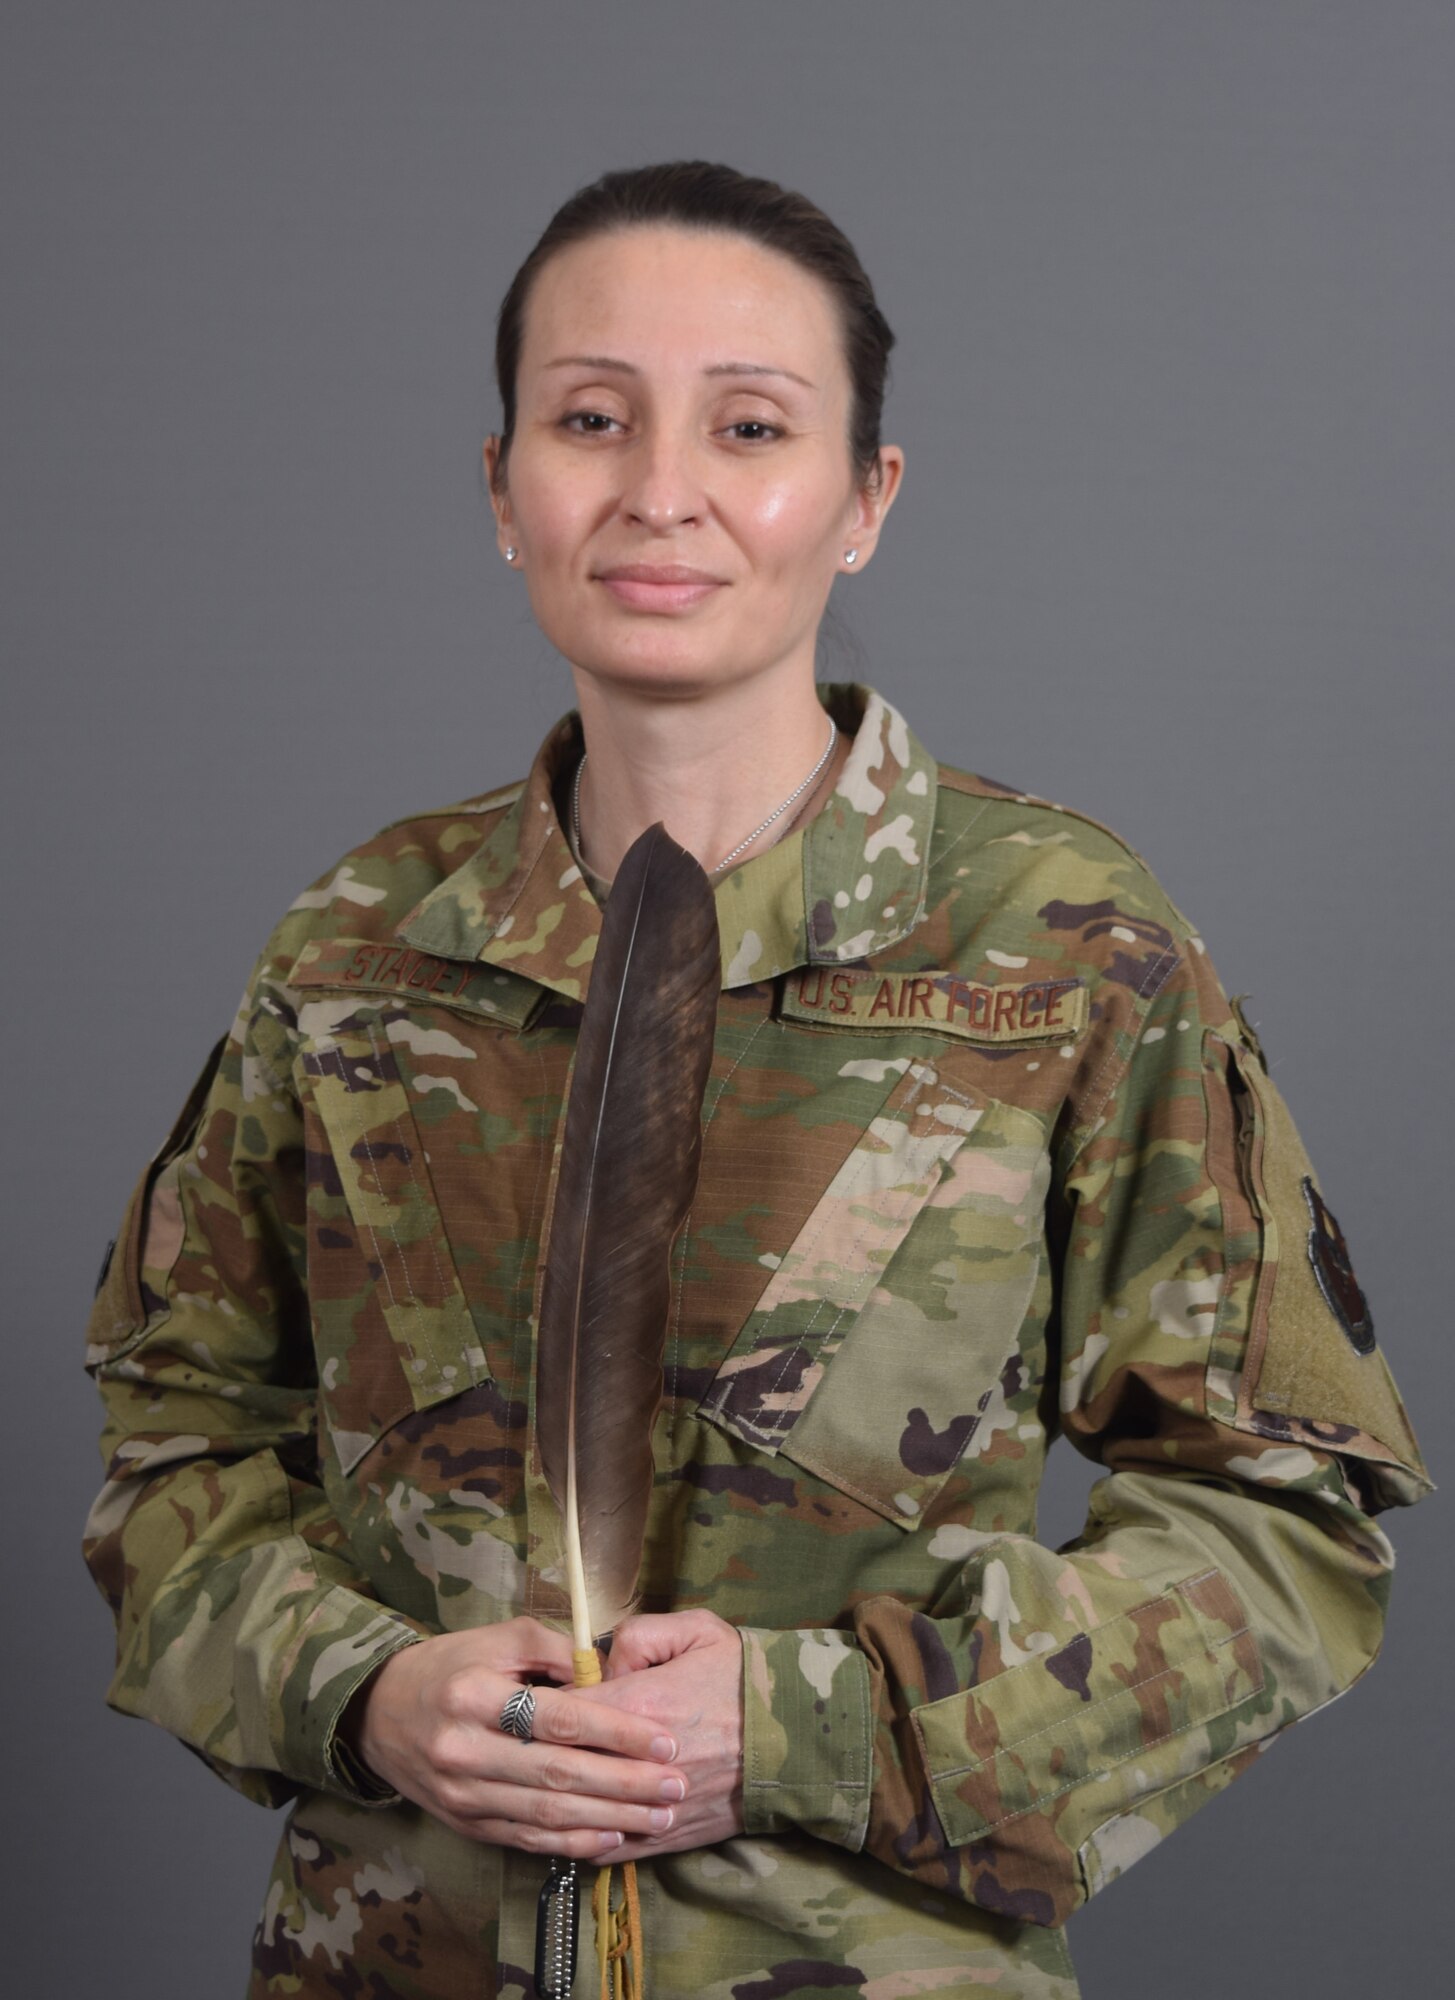 U.S. Air Force Master Sgt. Kristal Stacey, 81st Diagnostics and Therapeutics Squadron specialty imaging section chief, poses for a photo at Keesler Air Force Base, Mississippi, April 28, 2021. Stacey received her eagle feather as a part of the Mohawk Nation's tradition upon return from her deployment. (U.S. Air Force photo by Senior Airman Kimberly L. Mueller)